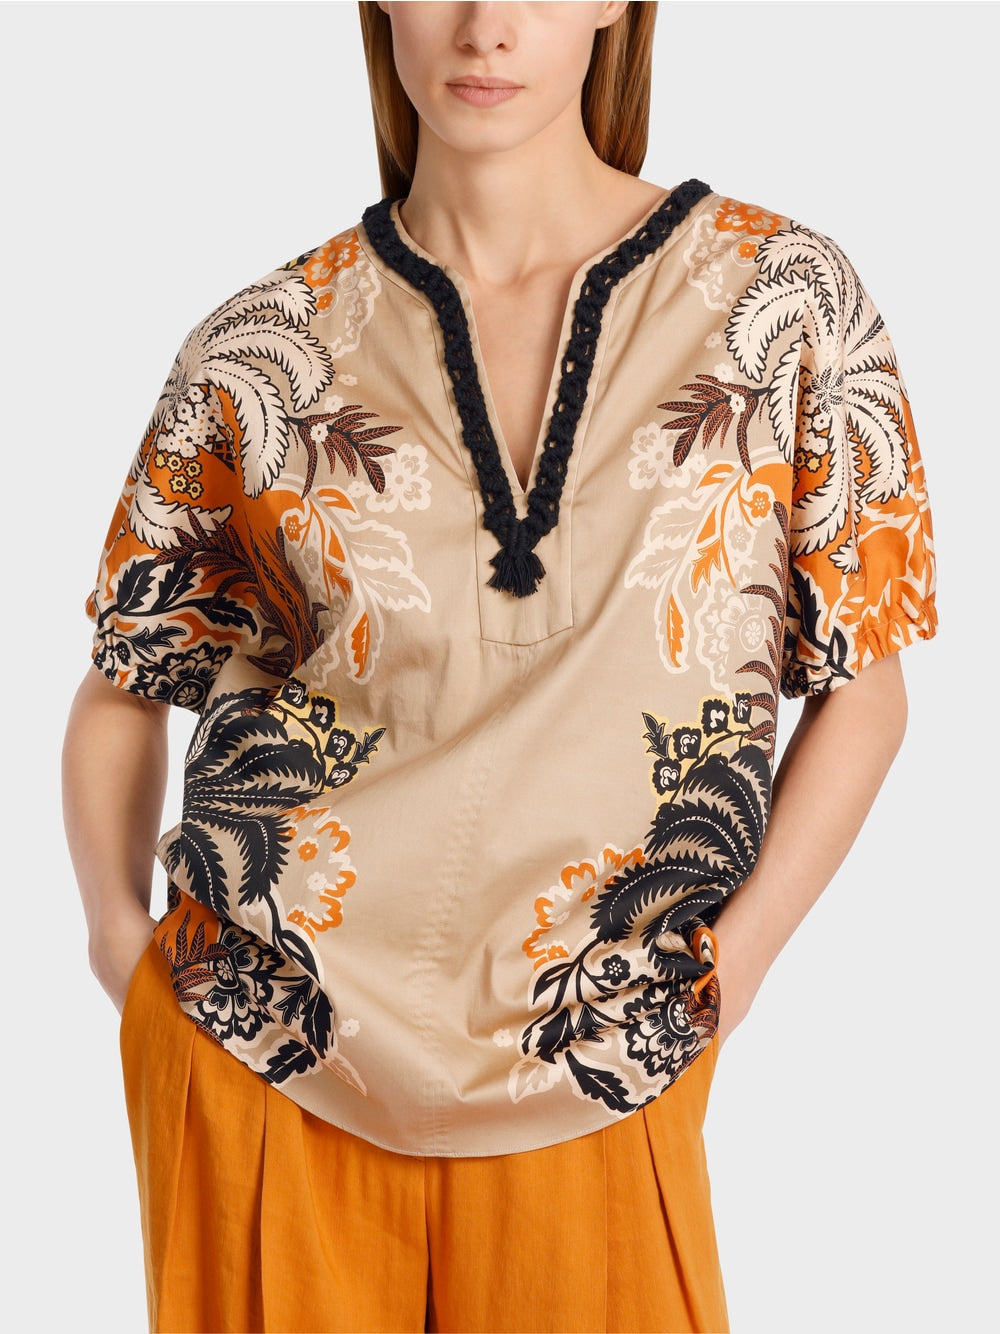 deep sand printed tunic-style blouse